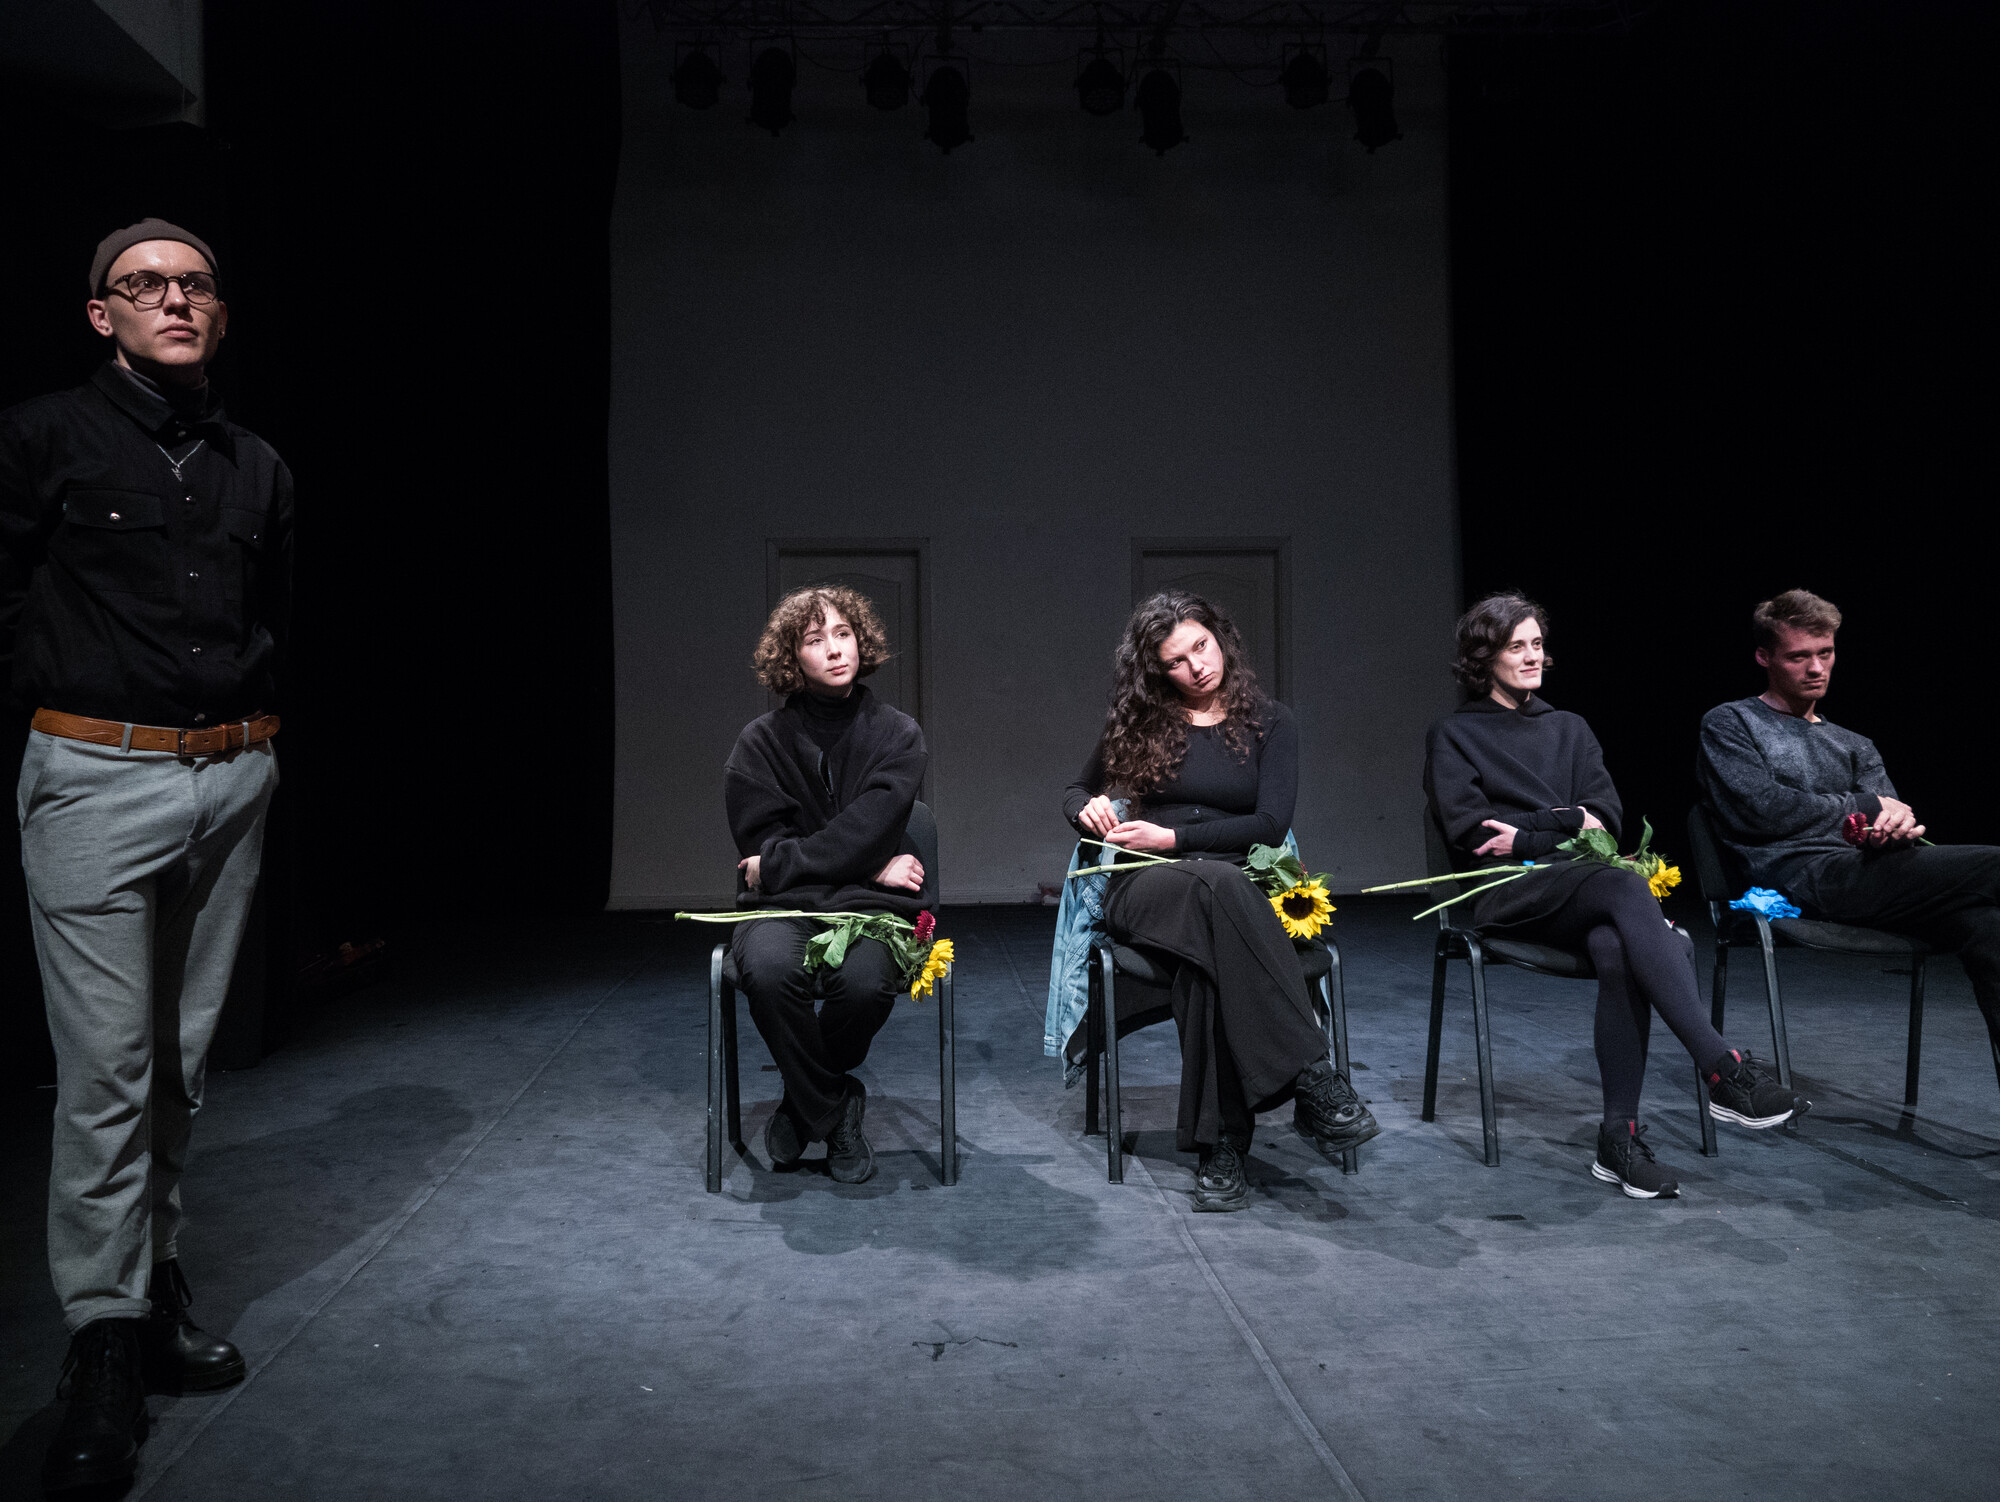 One performer stands next to four seated performers who hold sunflowers in their laps.